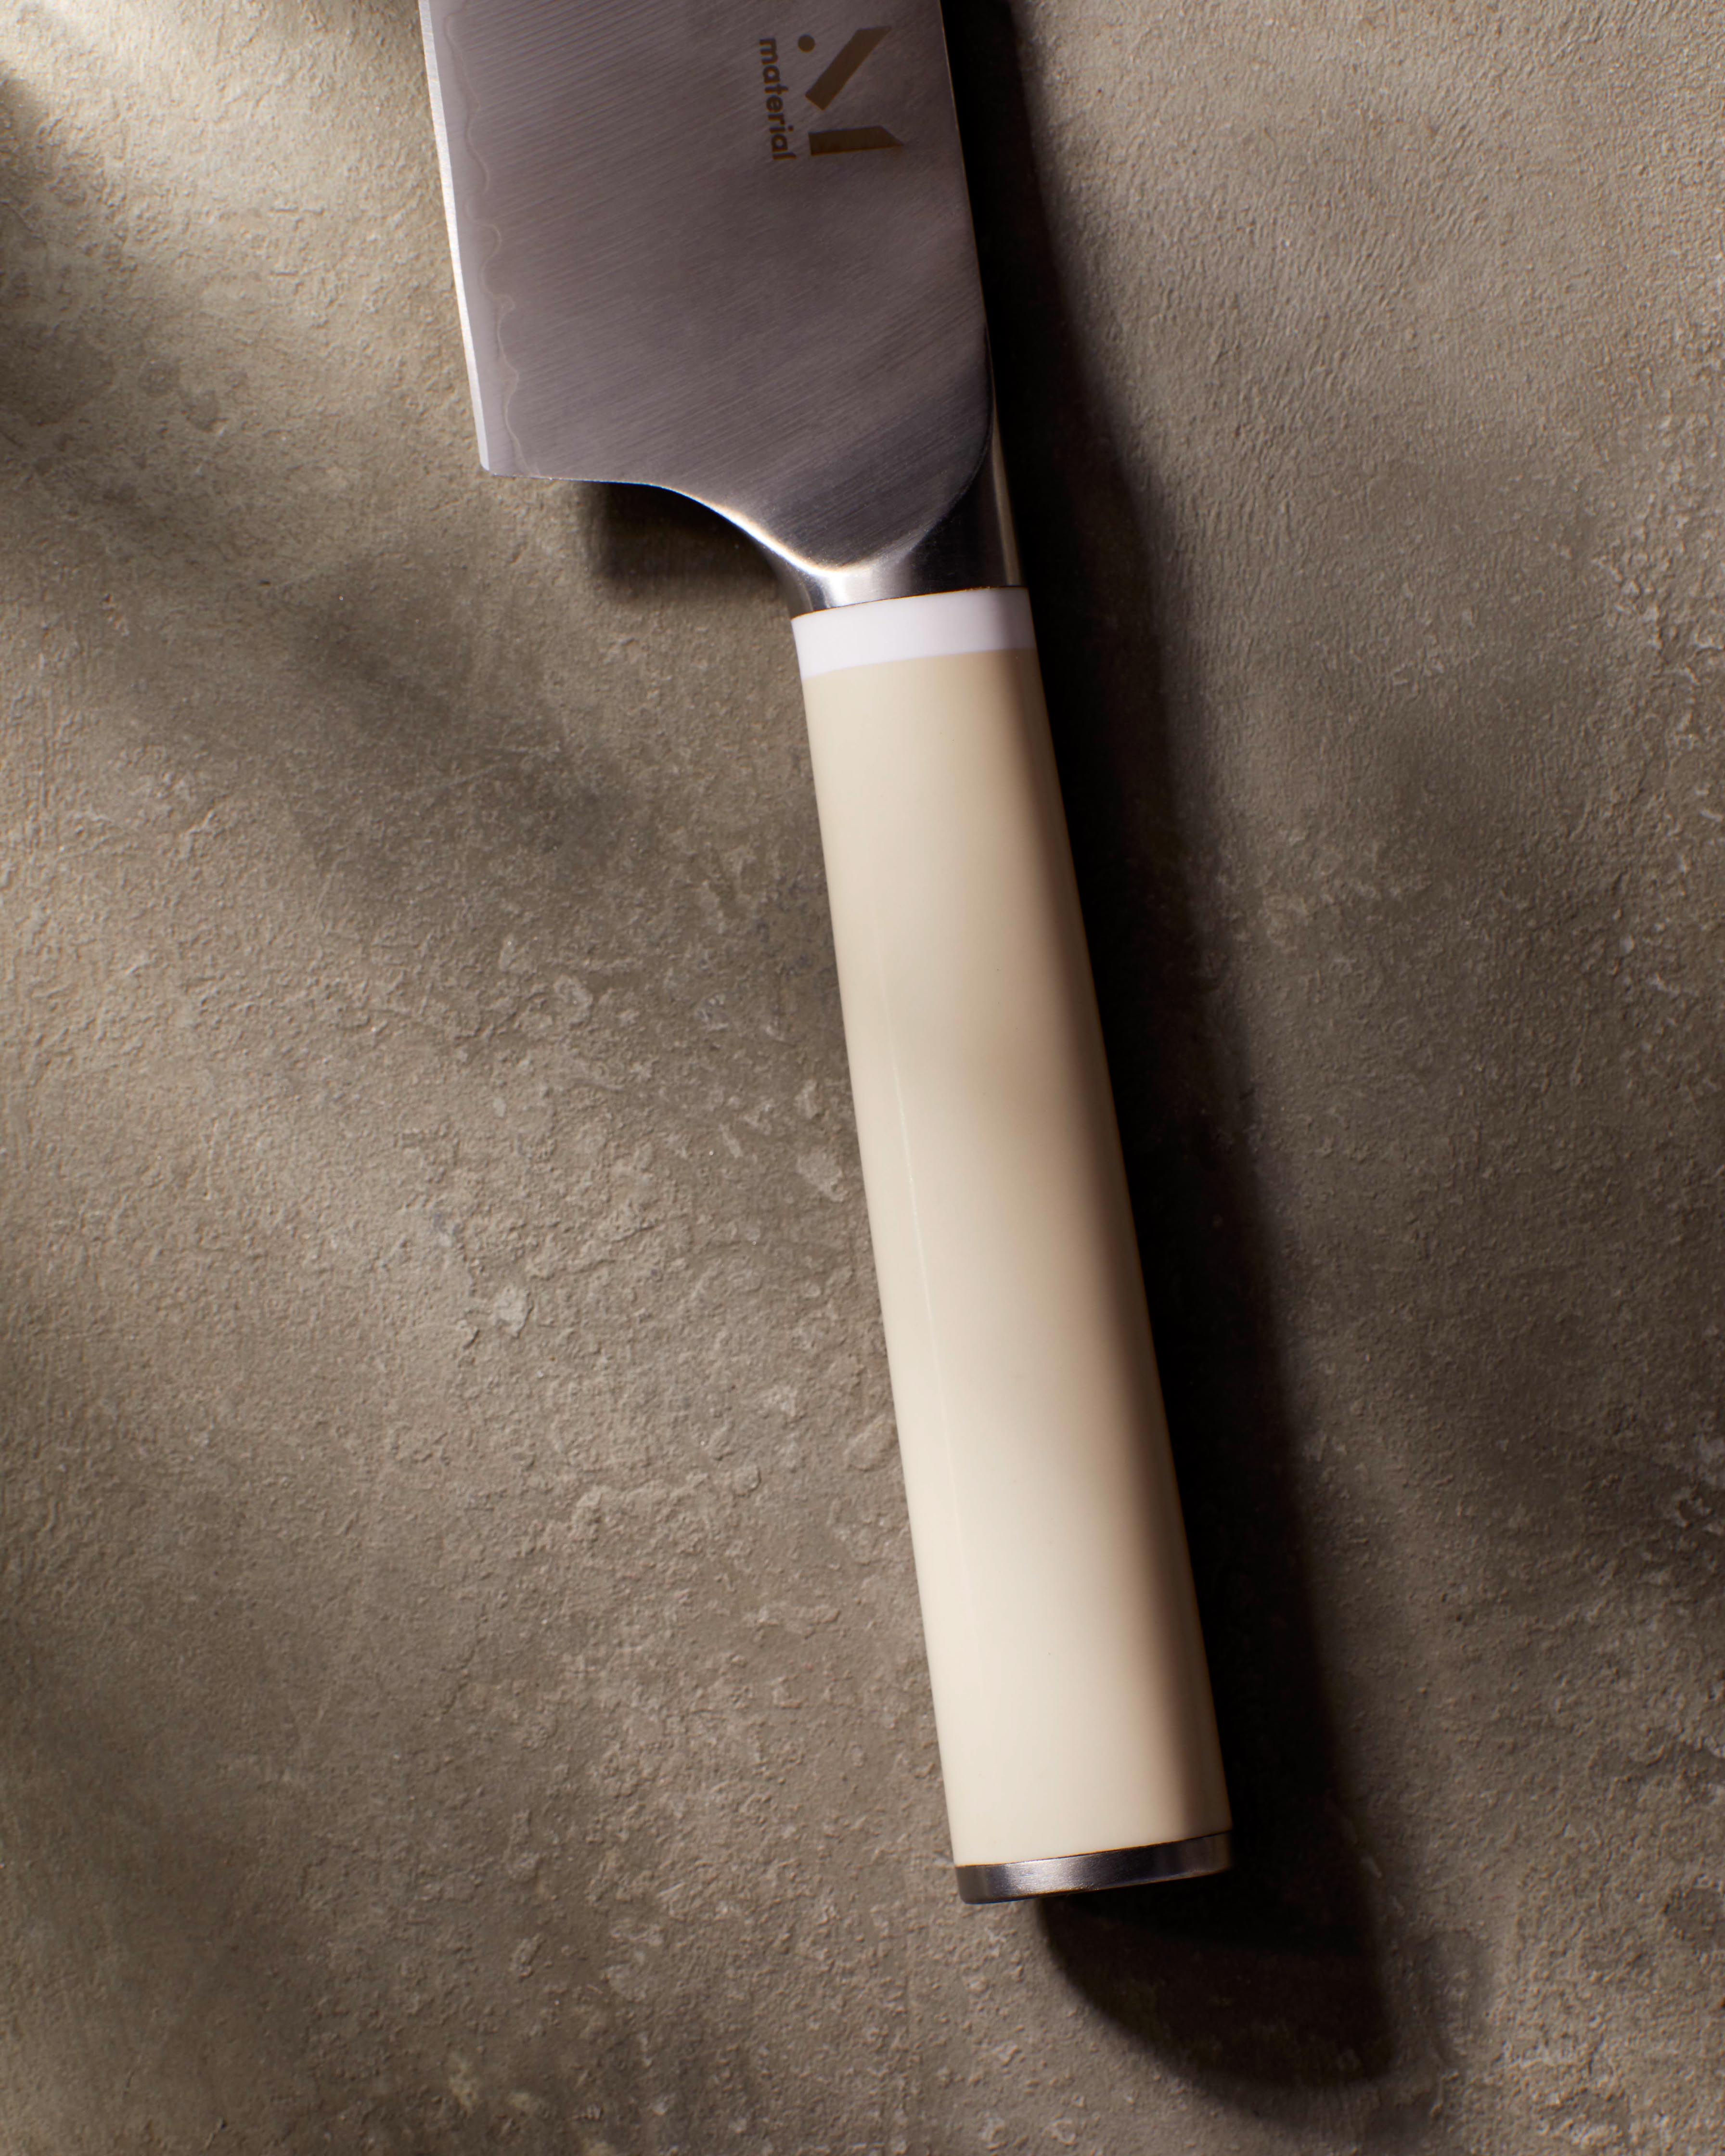 The 8 Knife: Thoughtfully Designed, Affordably Priced